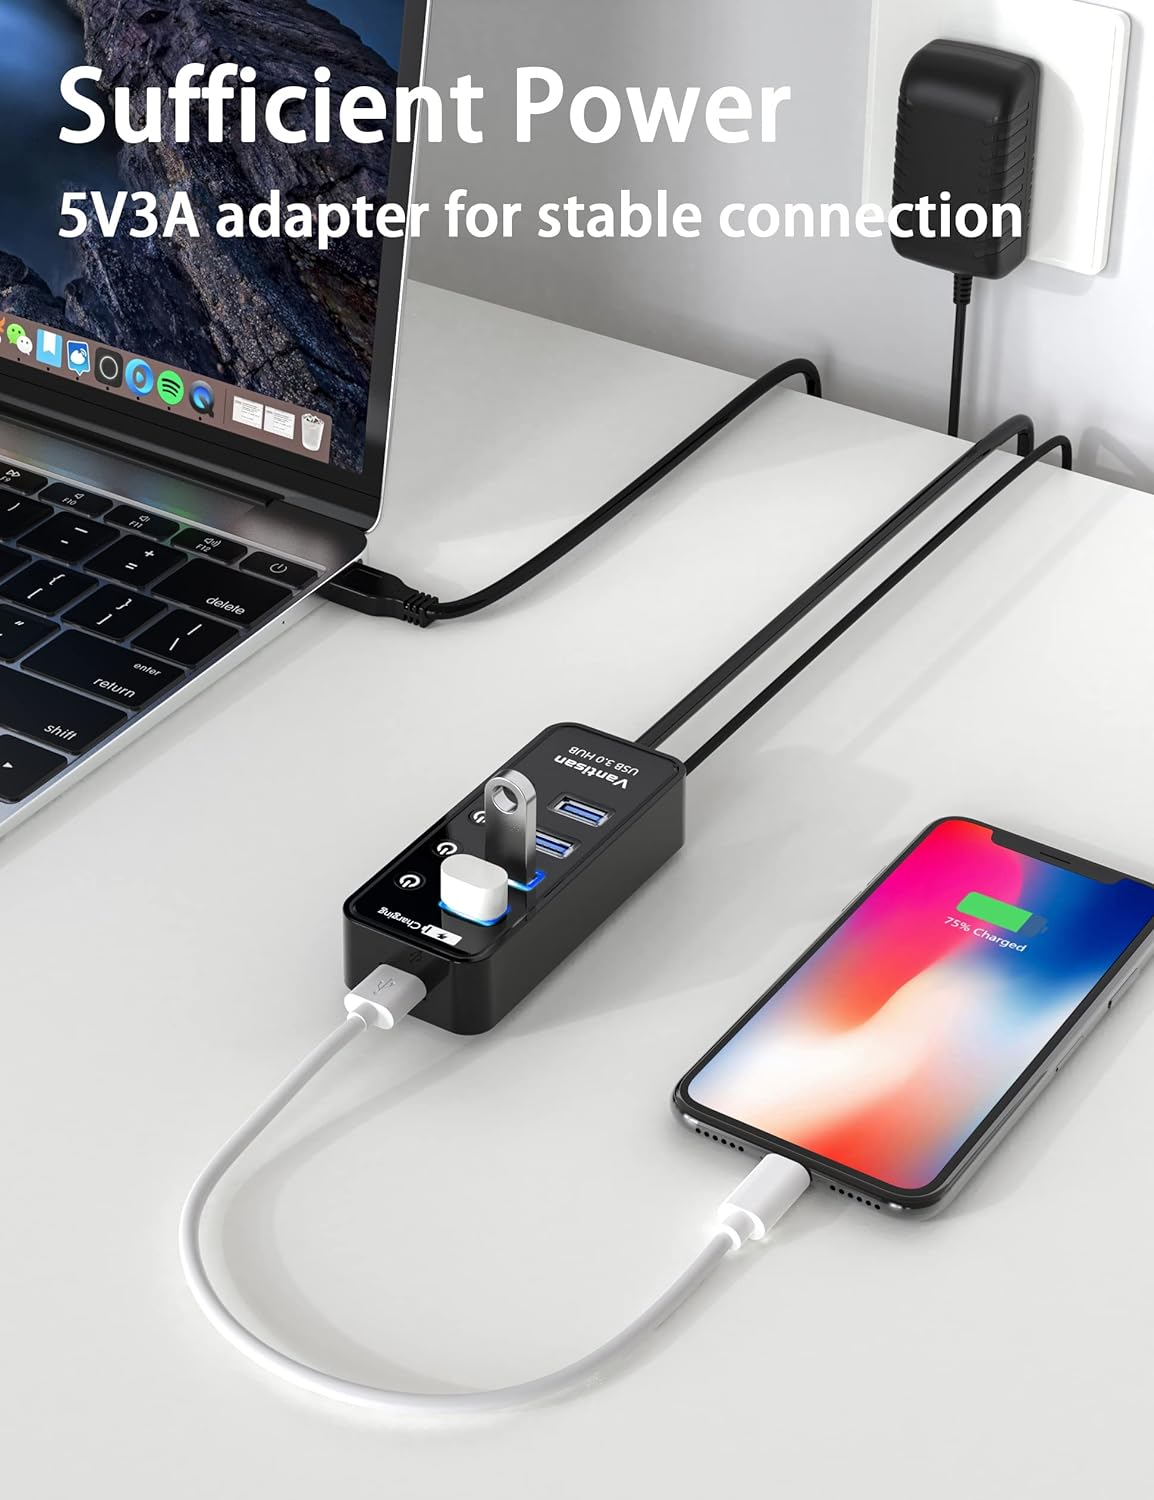 vantisan Powered USB 3.0 Hub, USB Extension 4-Port USB Hub Splitter (4 USB 3.0 Data Ports+1 Smart Charging Port) with 5V/3A Powered Adapter and Individual ON/Off Switches